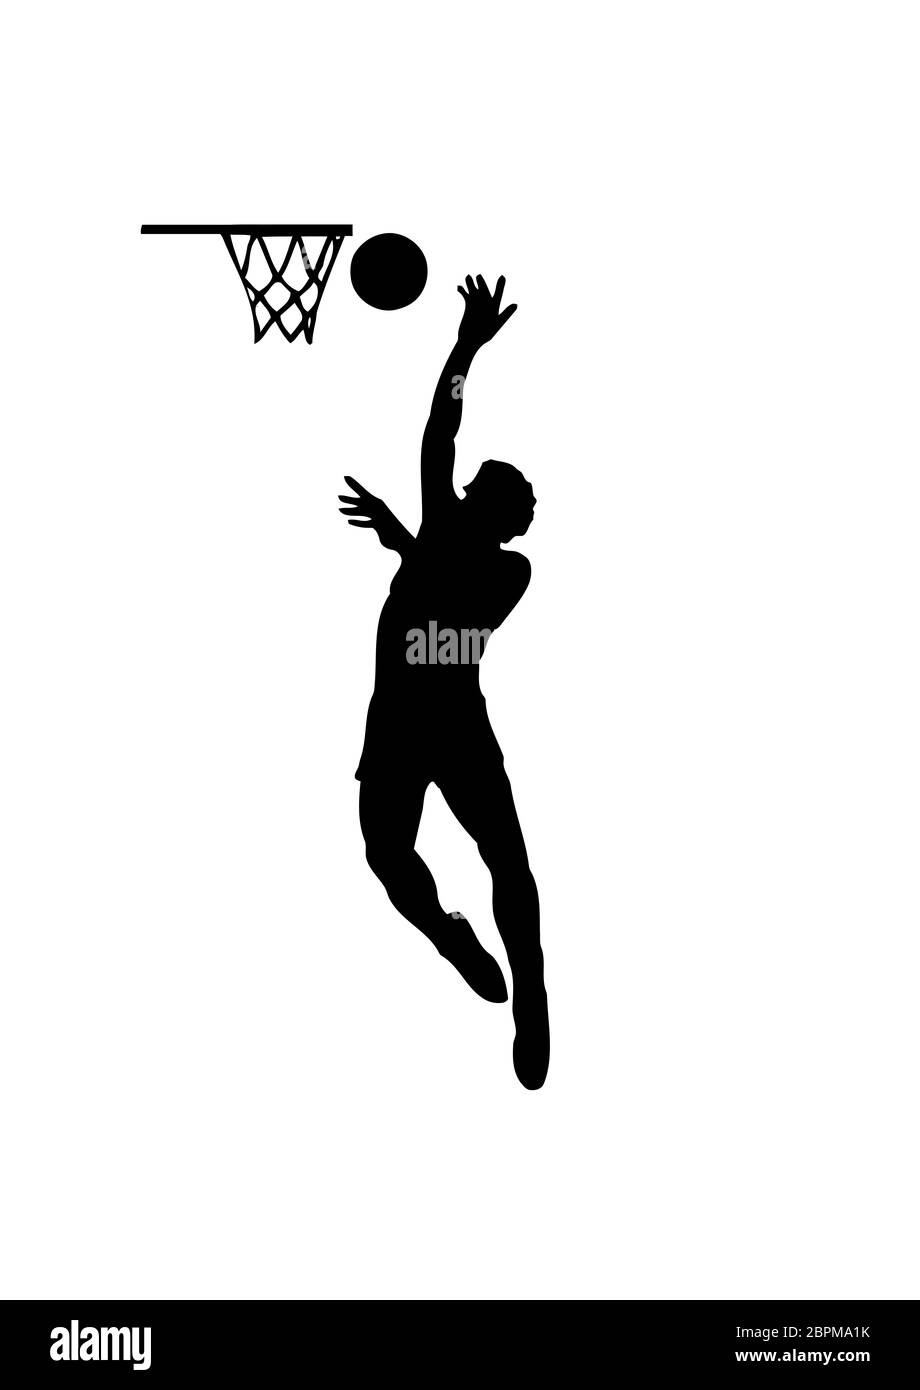 Basketball player Black and White Stock Photos & Images - Alamy